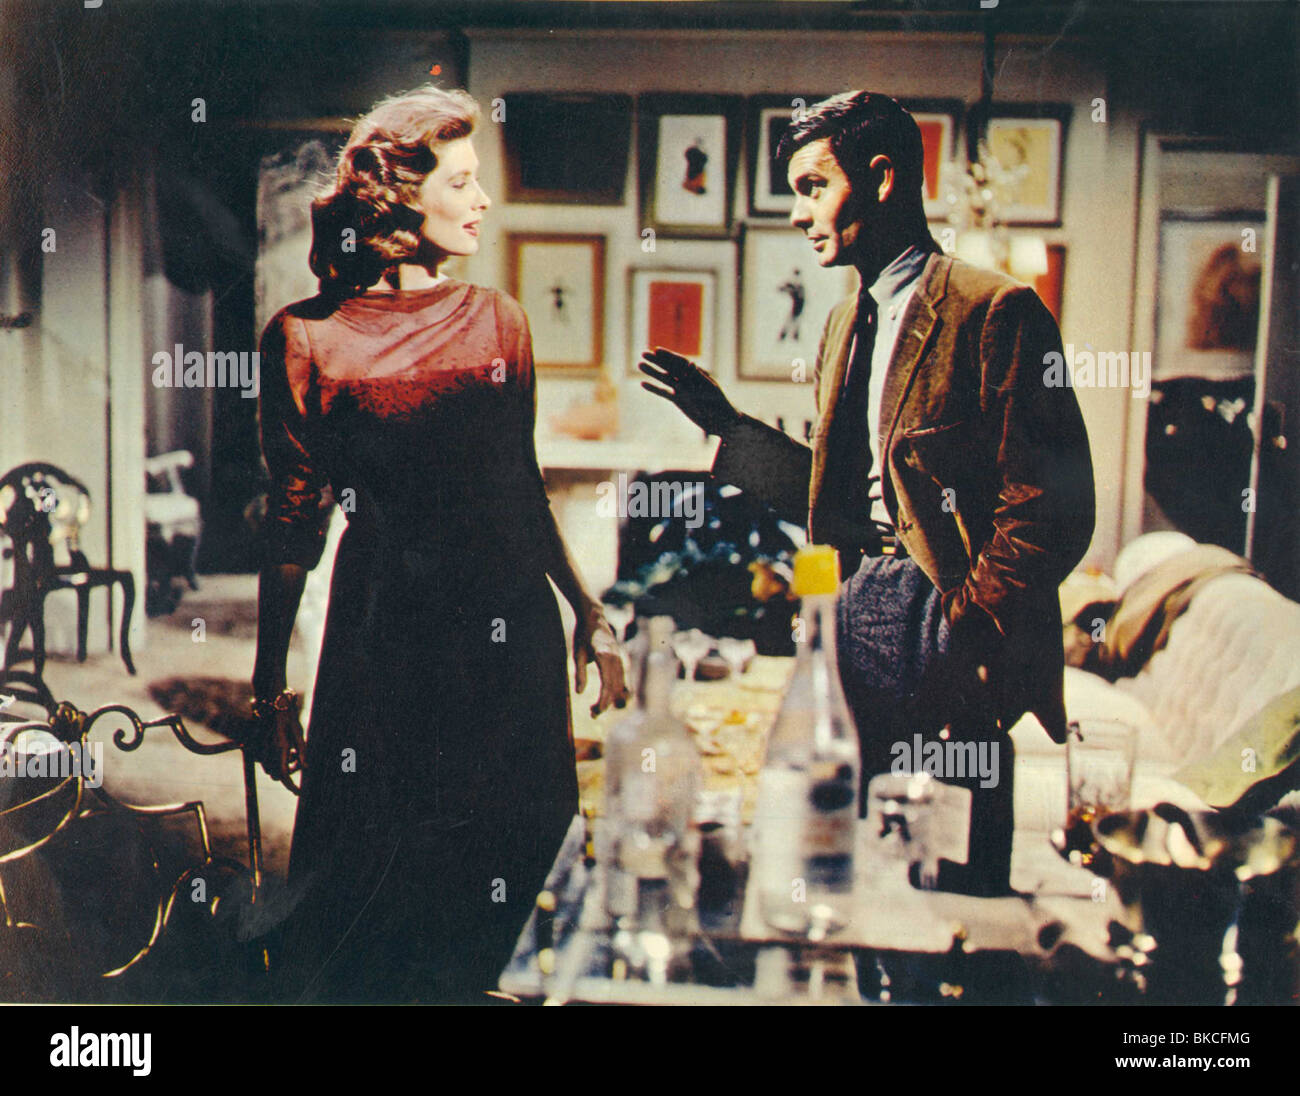 THE BEST OF EVERYTHING (1959) SUZY PARKER, LOUIS JOURDAN BOET 005FOH Stock Photo